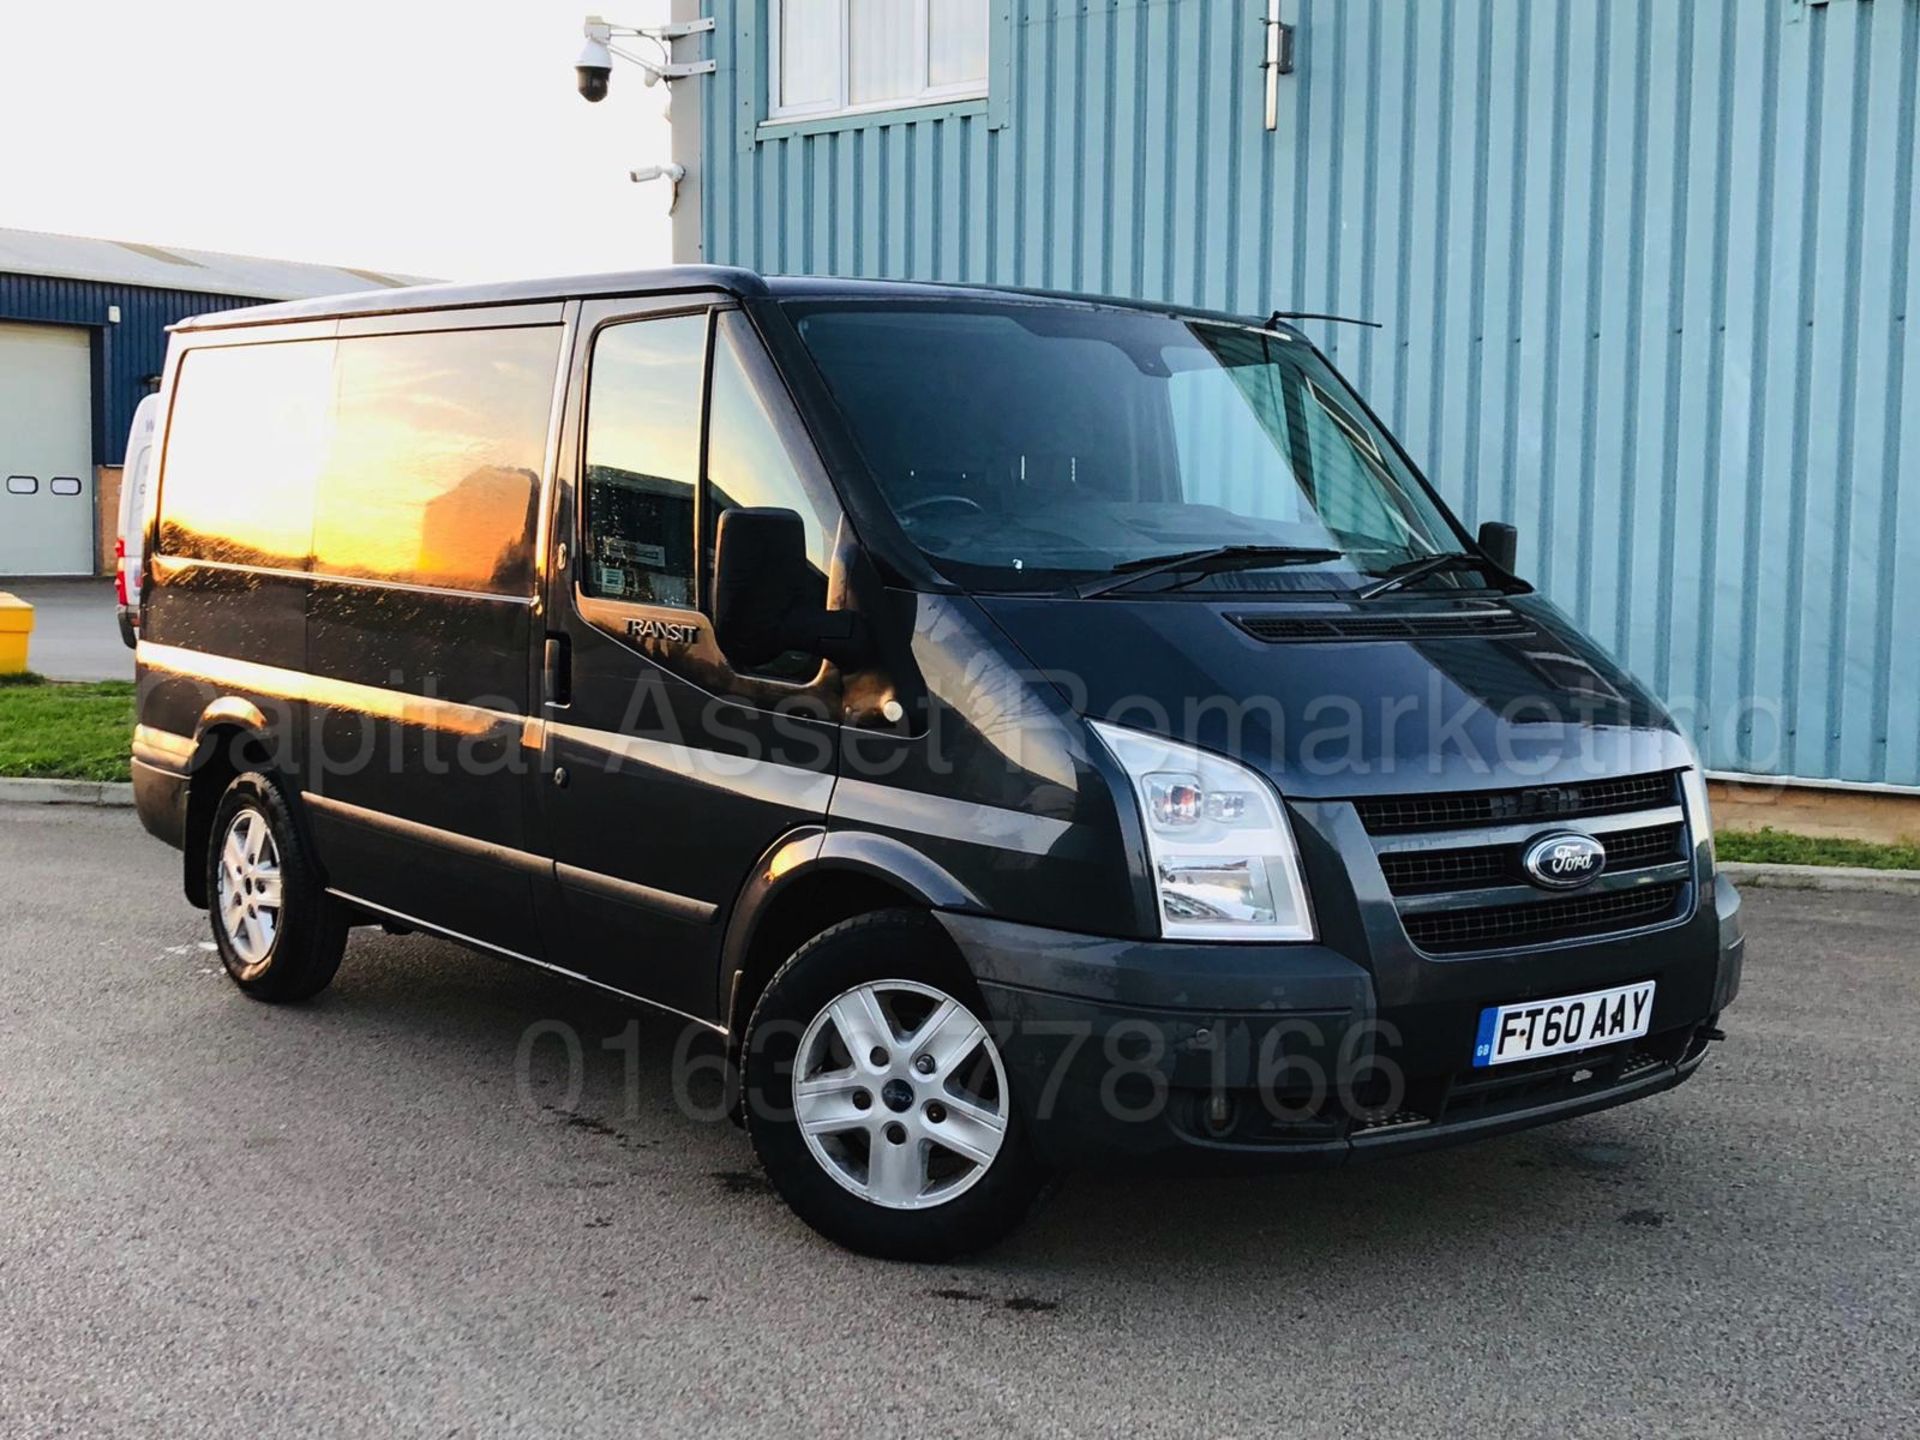 FORD TRANSIT 115 T260S *LIMITED EDITION* (2011 MODEL) '2.2 TDCI - 115 BHP - 6 SPEED' **AIR CON** - Image 3 of 34